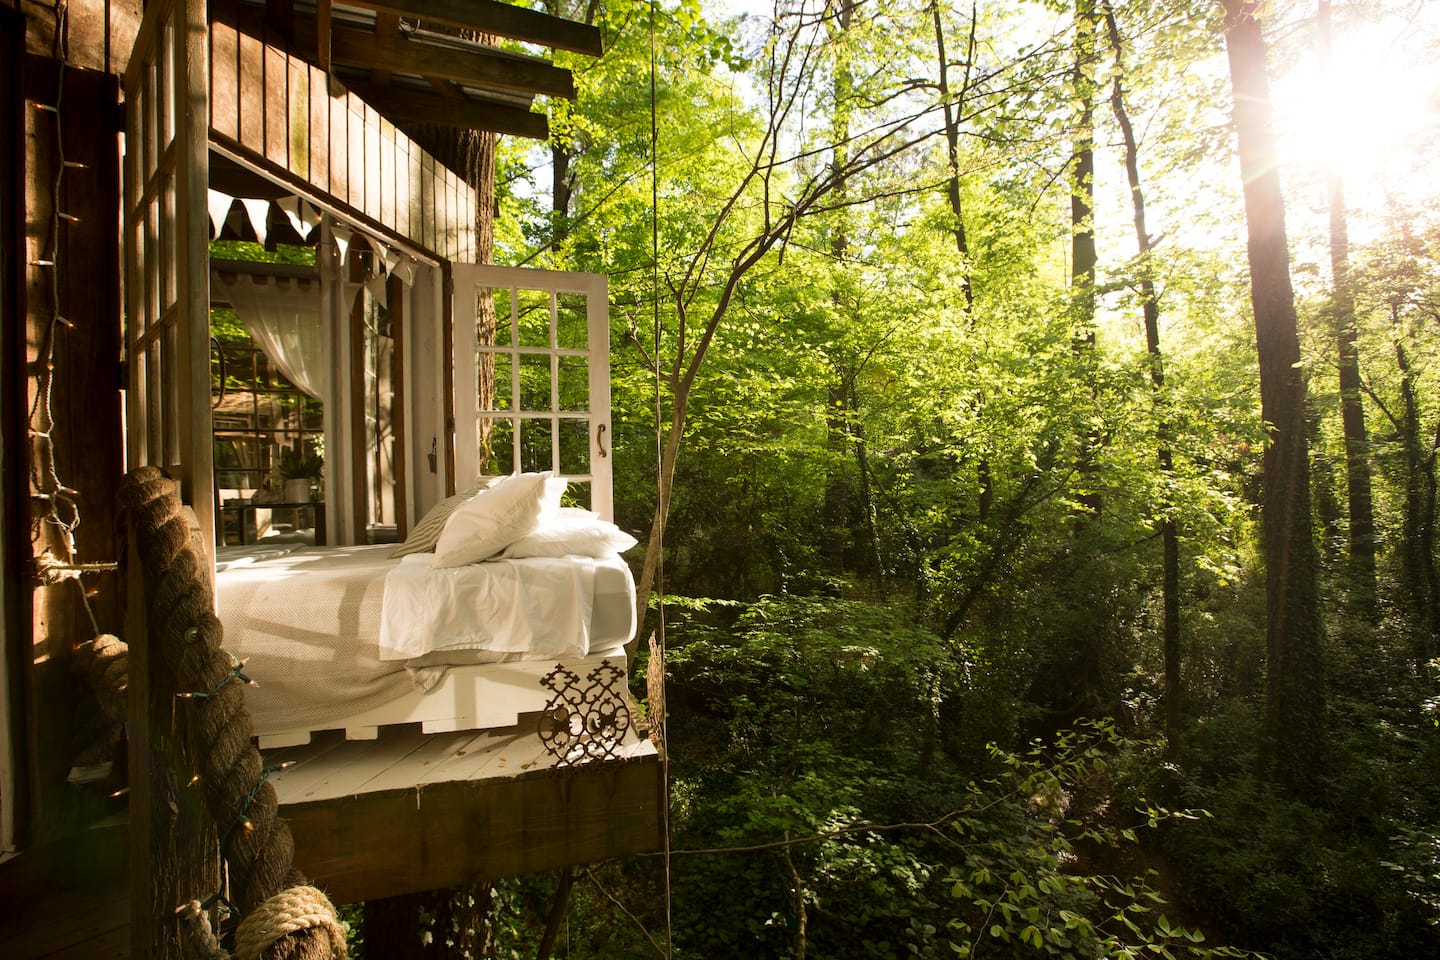 Secluded inland treehouse, one of the best Airbnbs in the United States